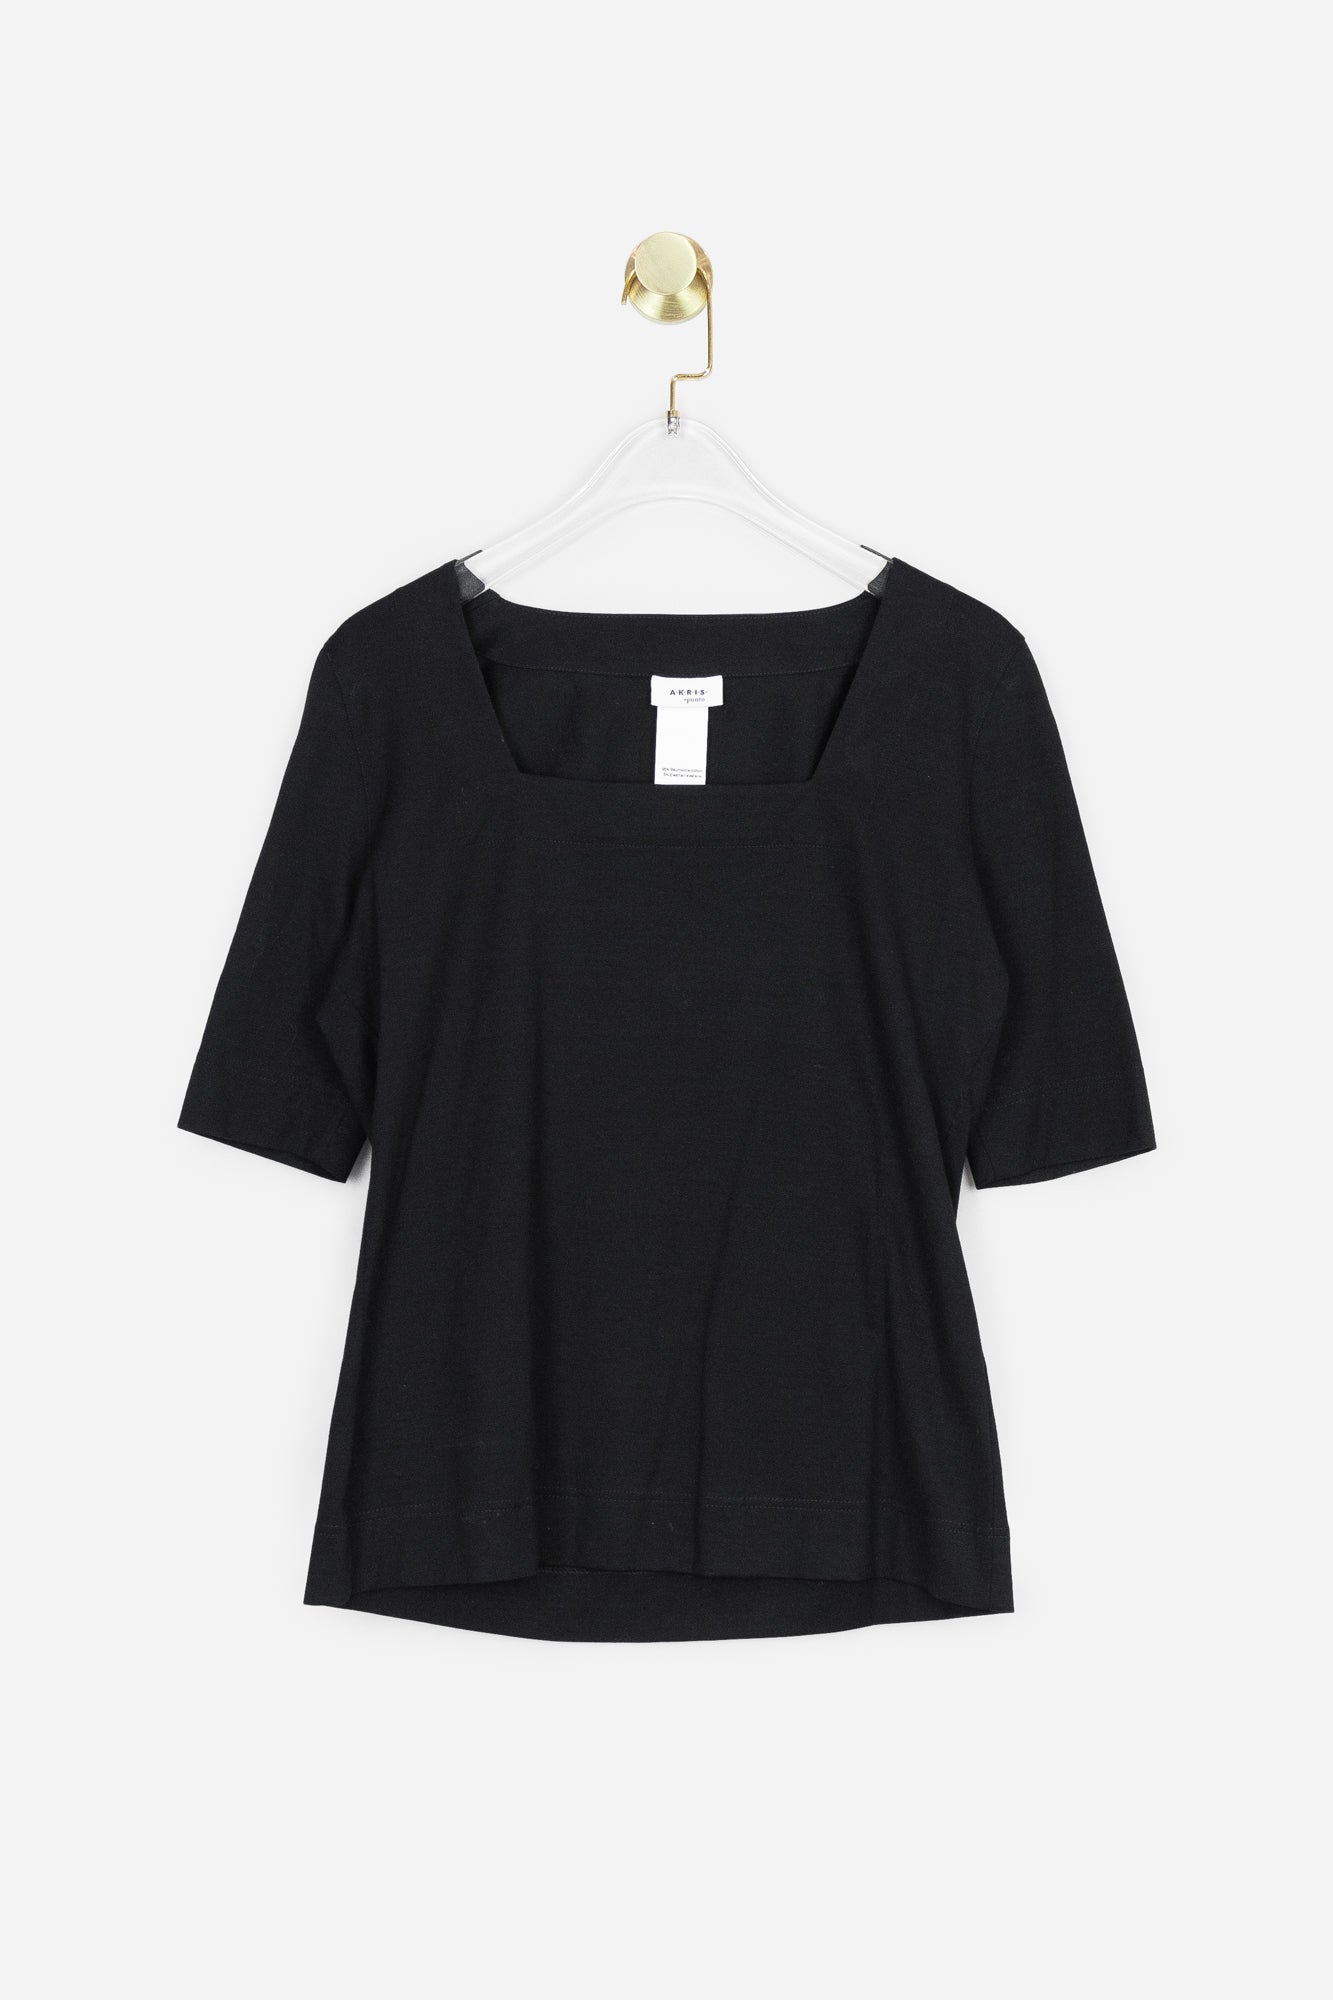 Black Squared Neck T-Shirt - So Over It Luxury Consignment